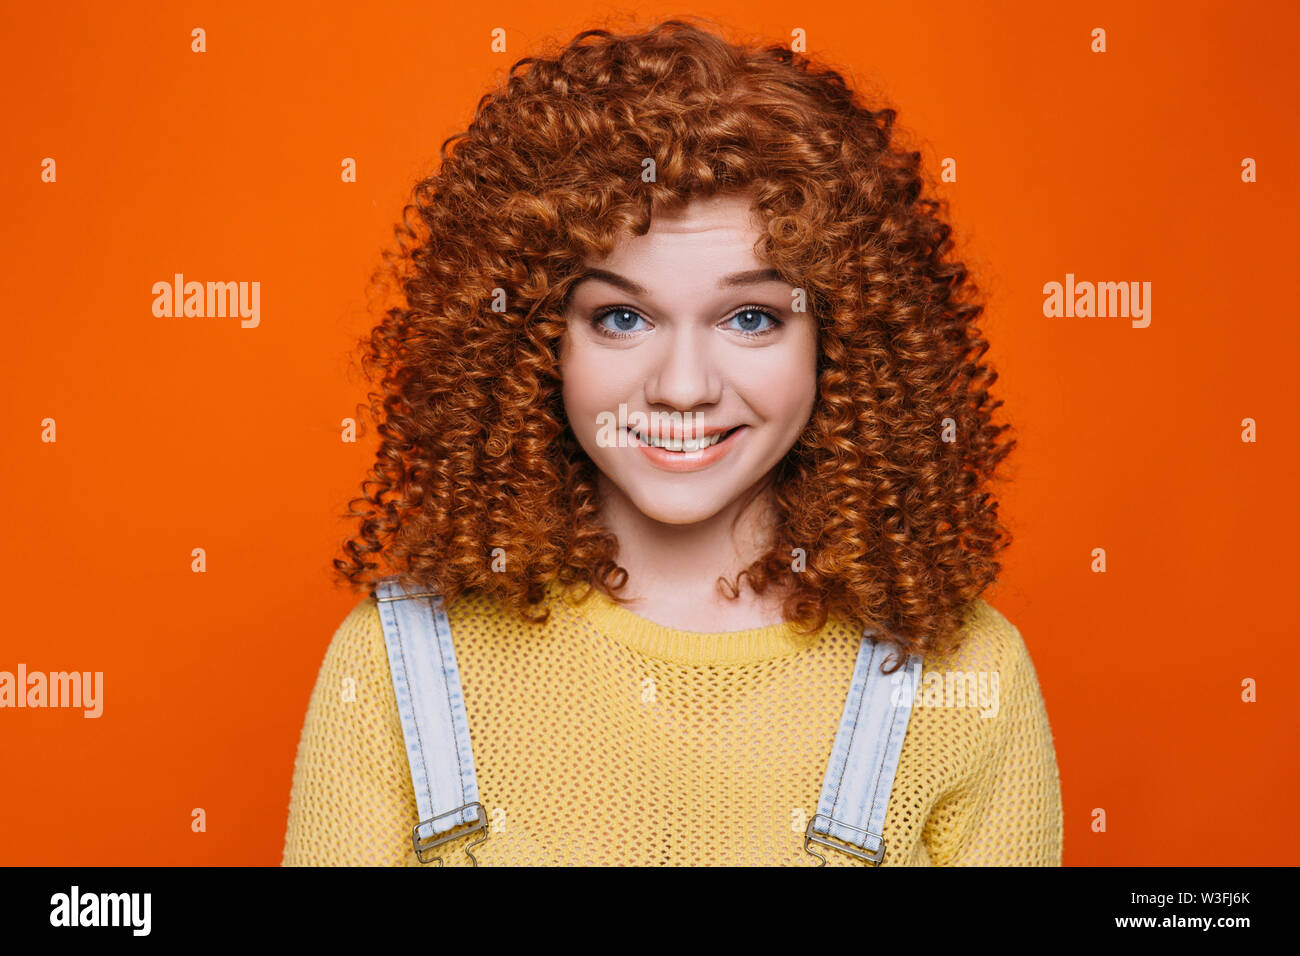 Beautiful red-haired woman with perfect curly hair smiling looking at camera. Perfect curls hairstyle Stock Photo